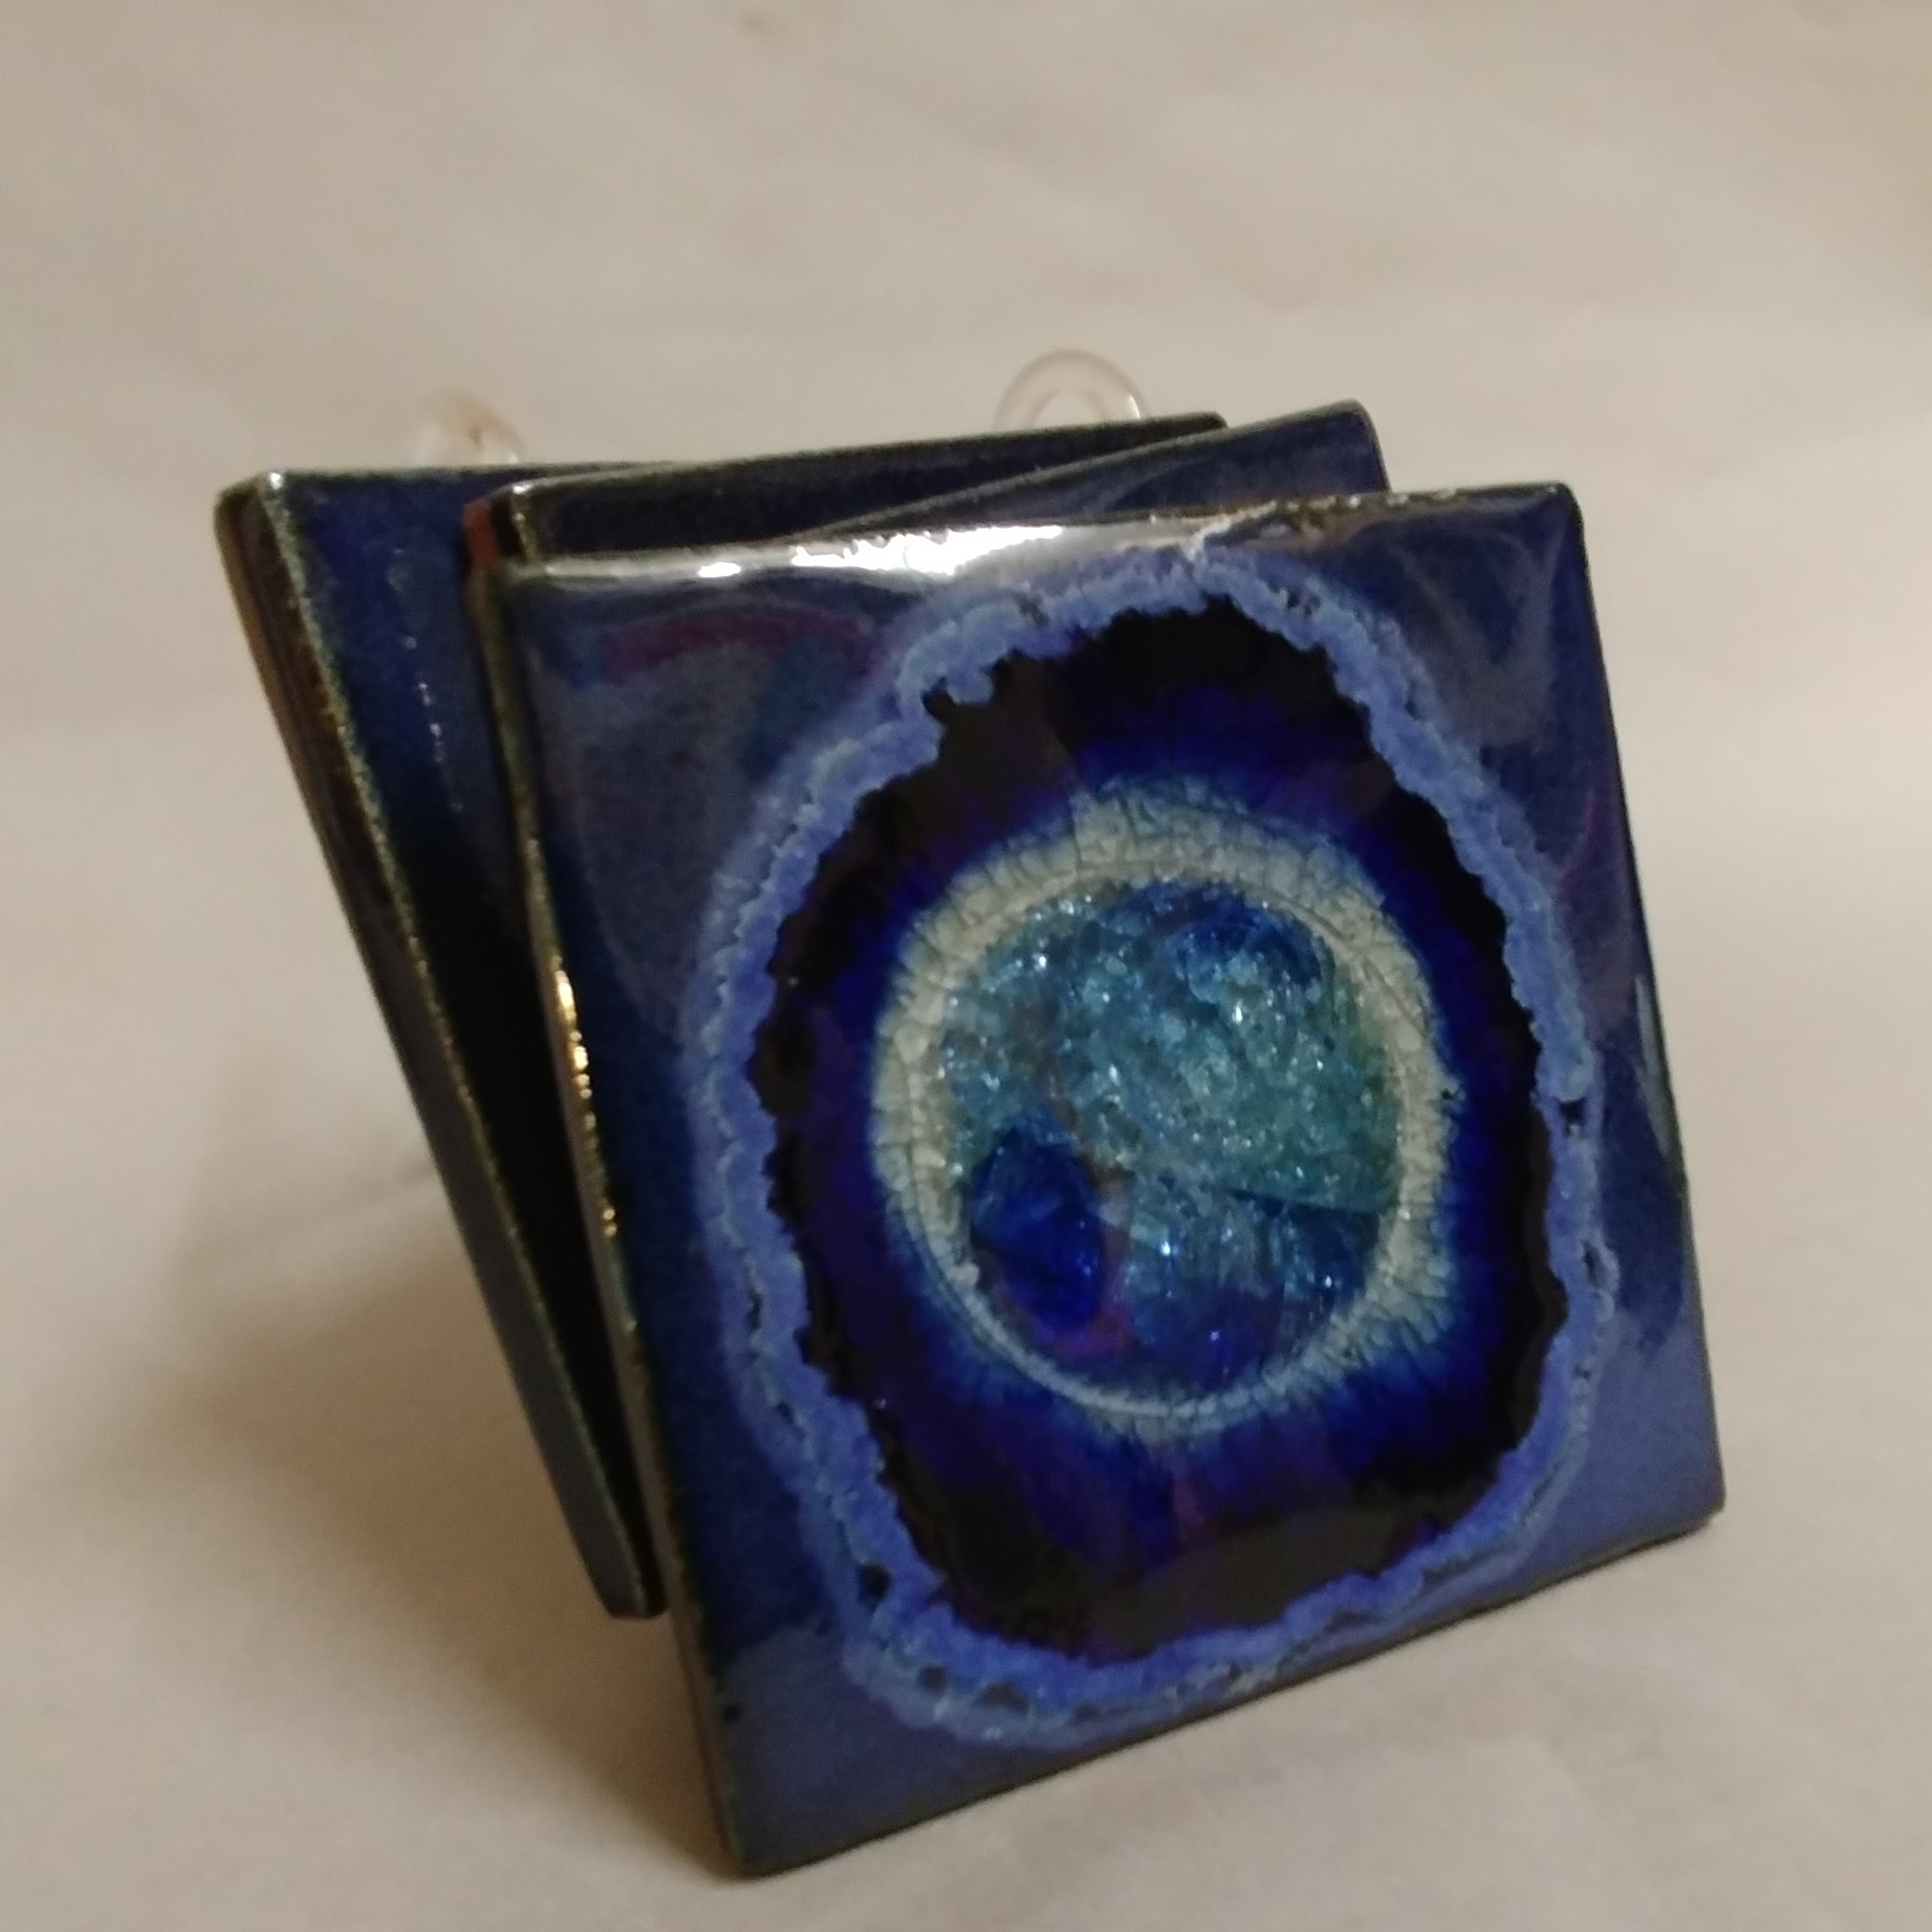 KB-587 Coasters Set of 4 Cobalt $43 at Hunter Wolff Gallery